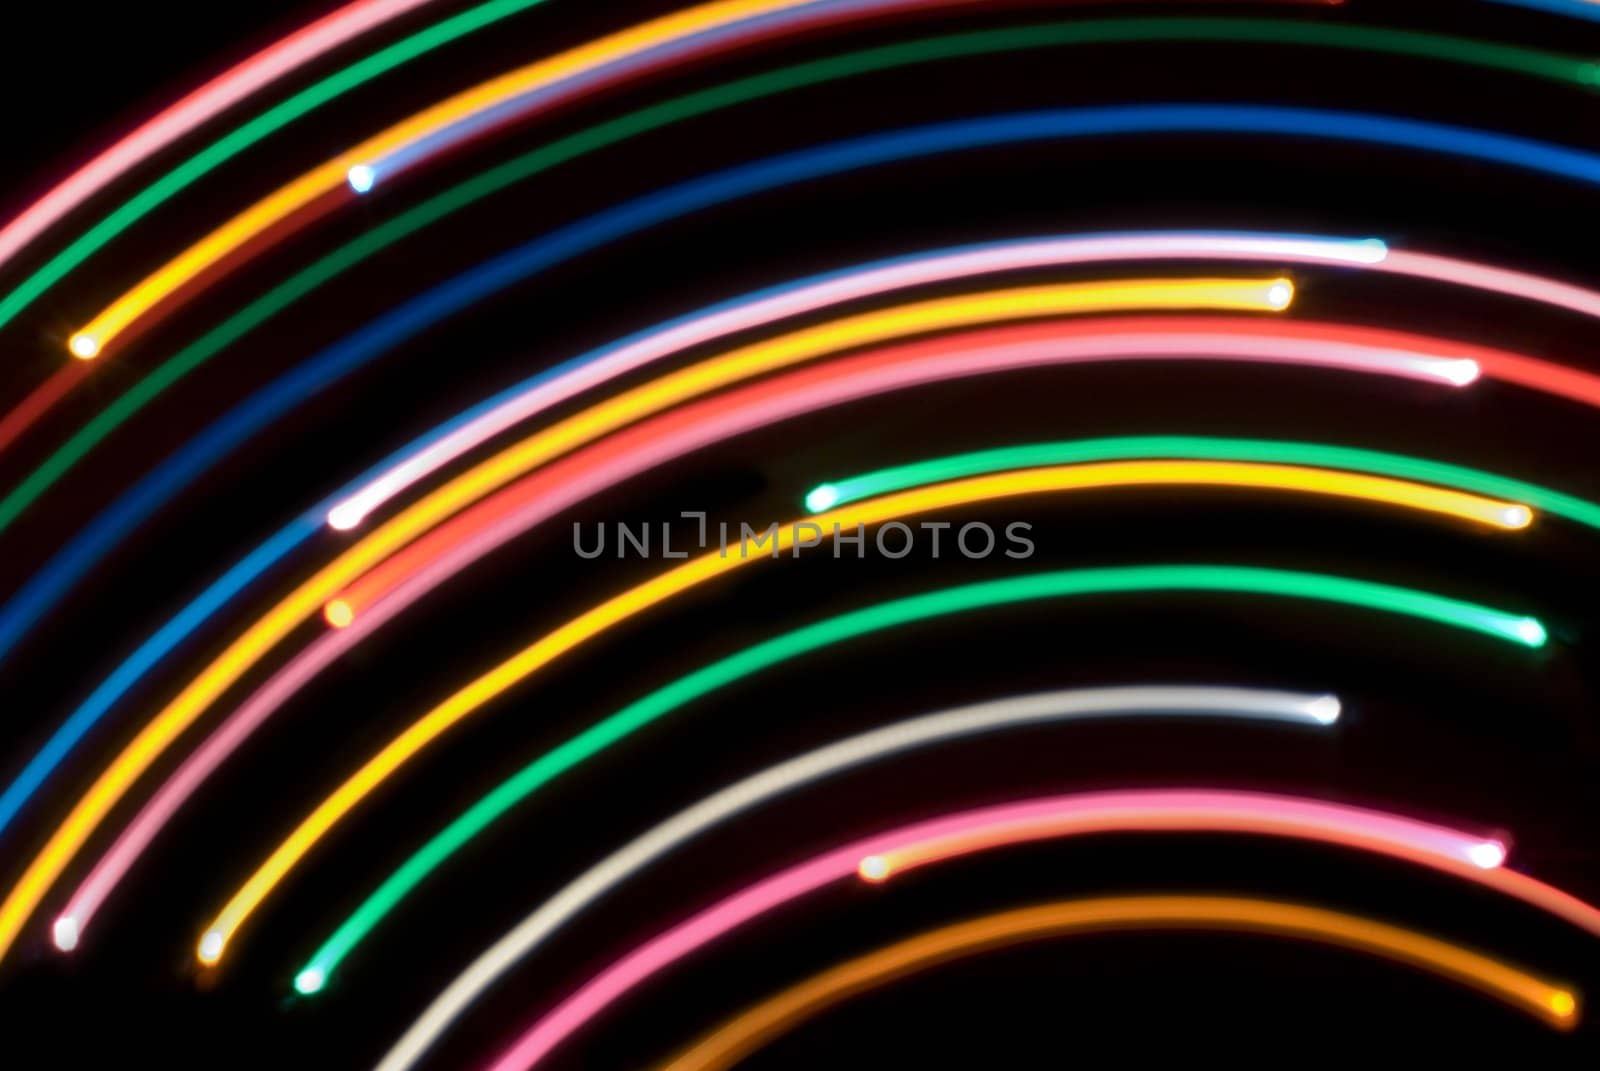 abstract background composed of arcs of blurred coloured light